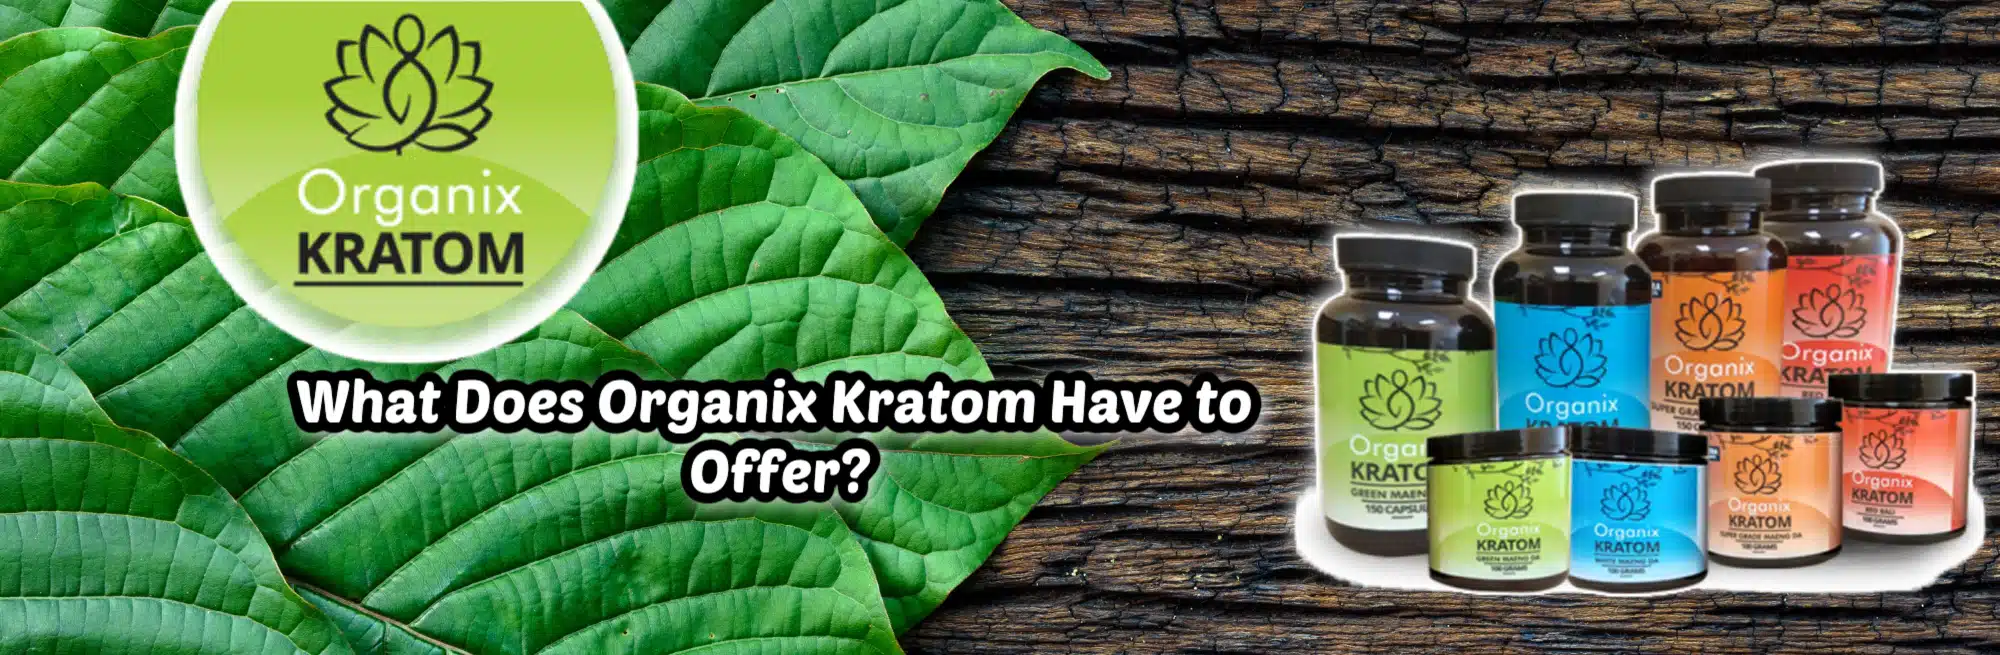 "what does organix kratom have to offer" banner with product line display